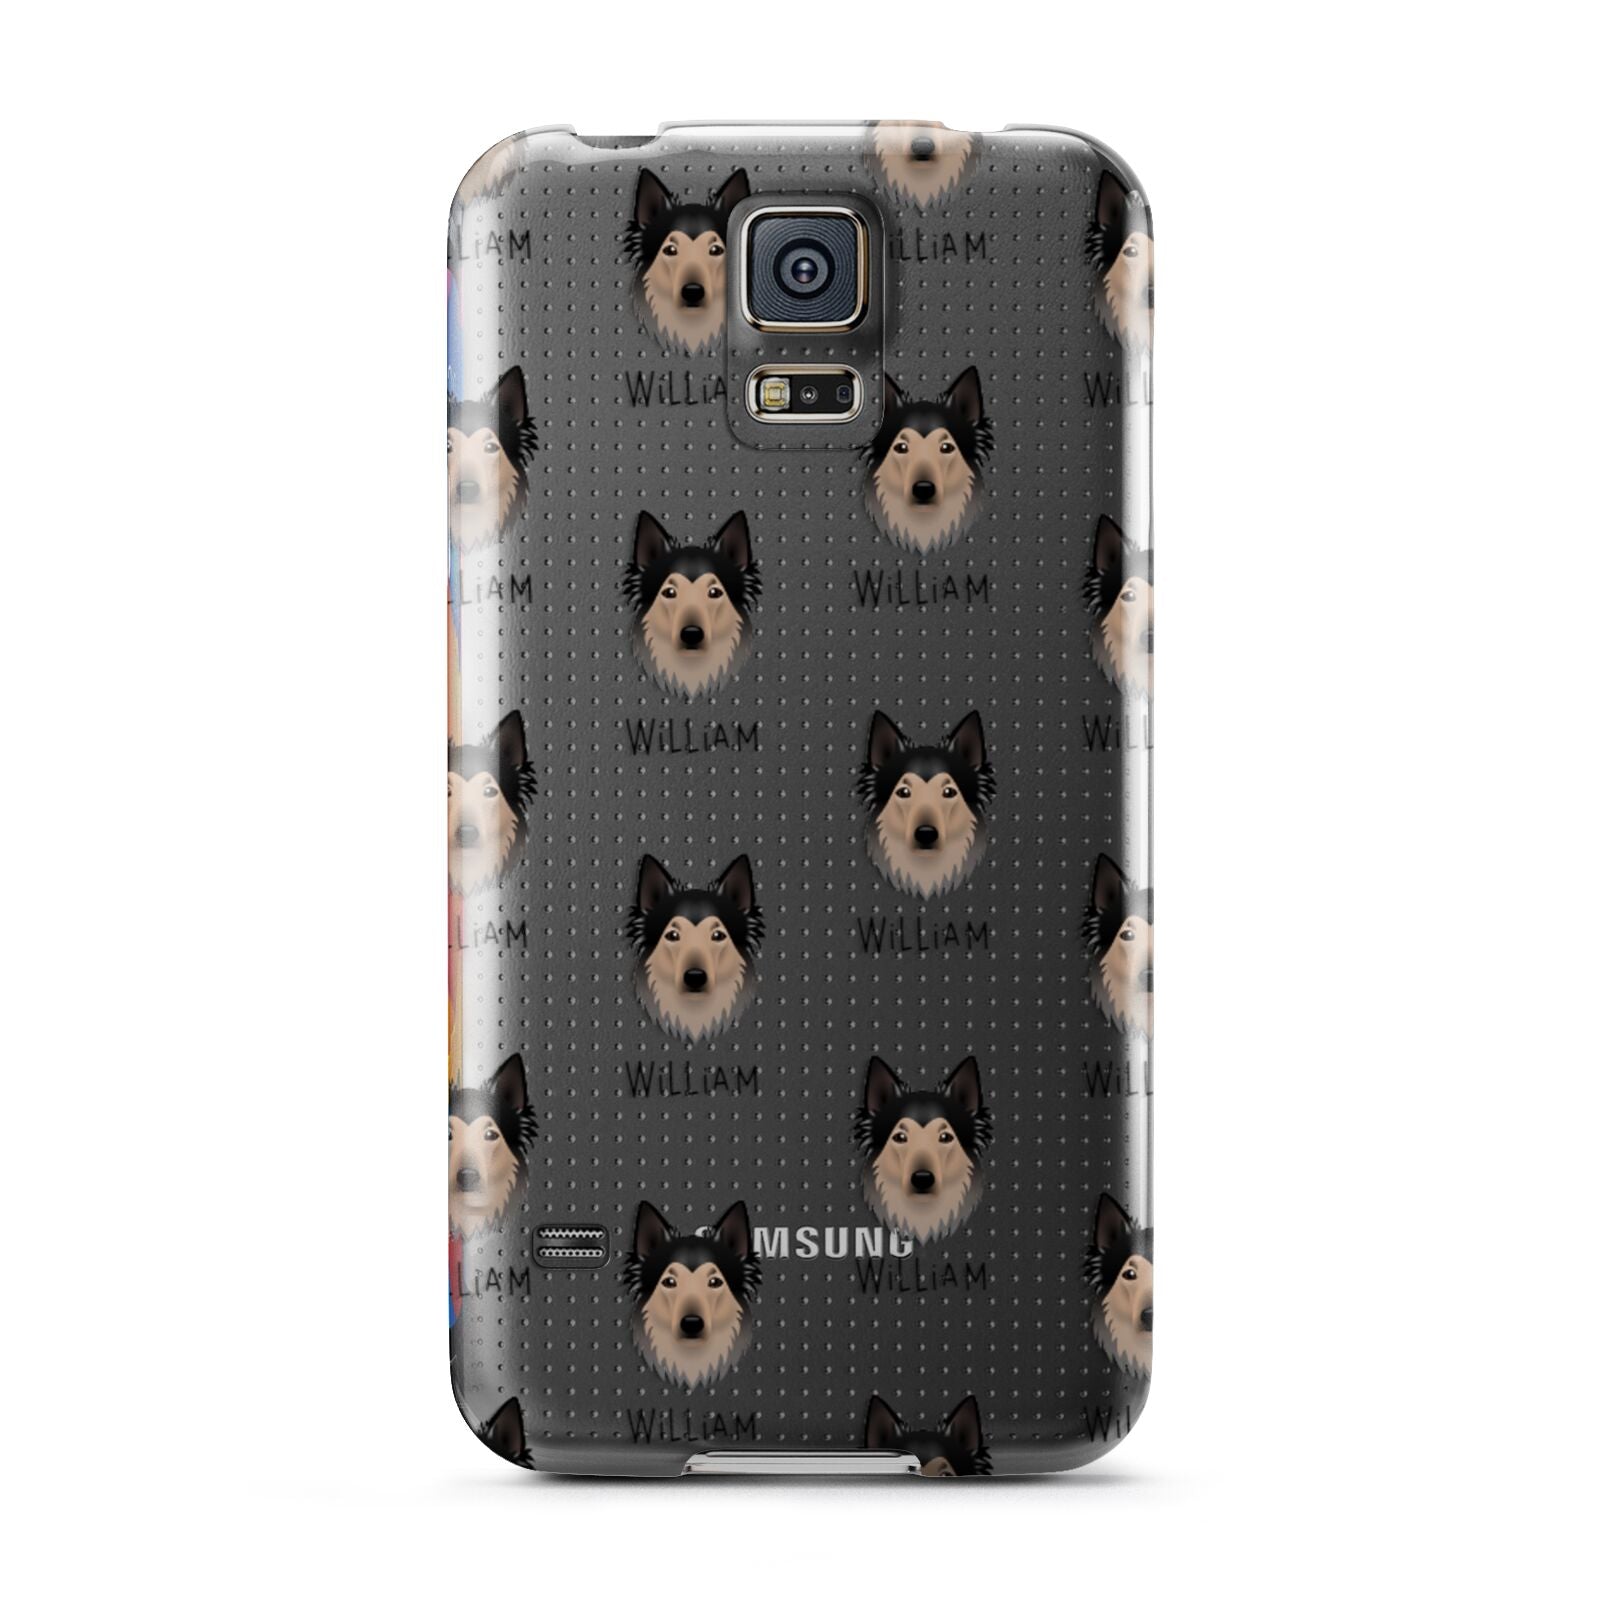 Shollie Icon with Name Samsung Galaxy S5 Case